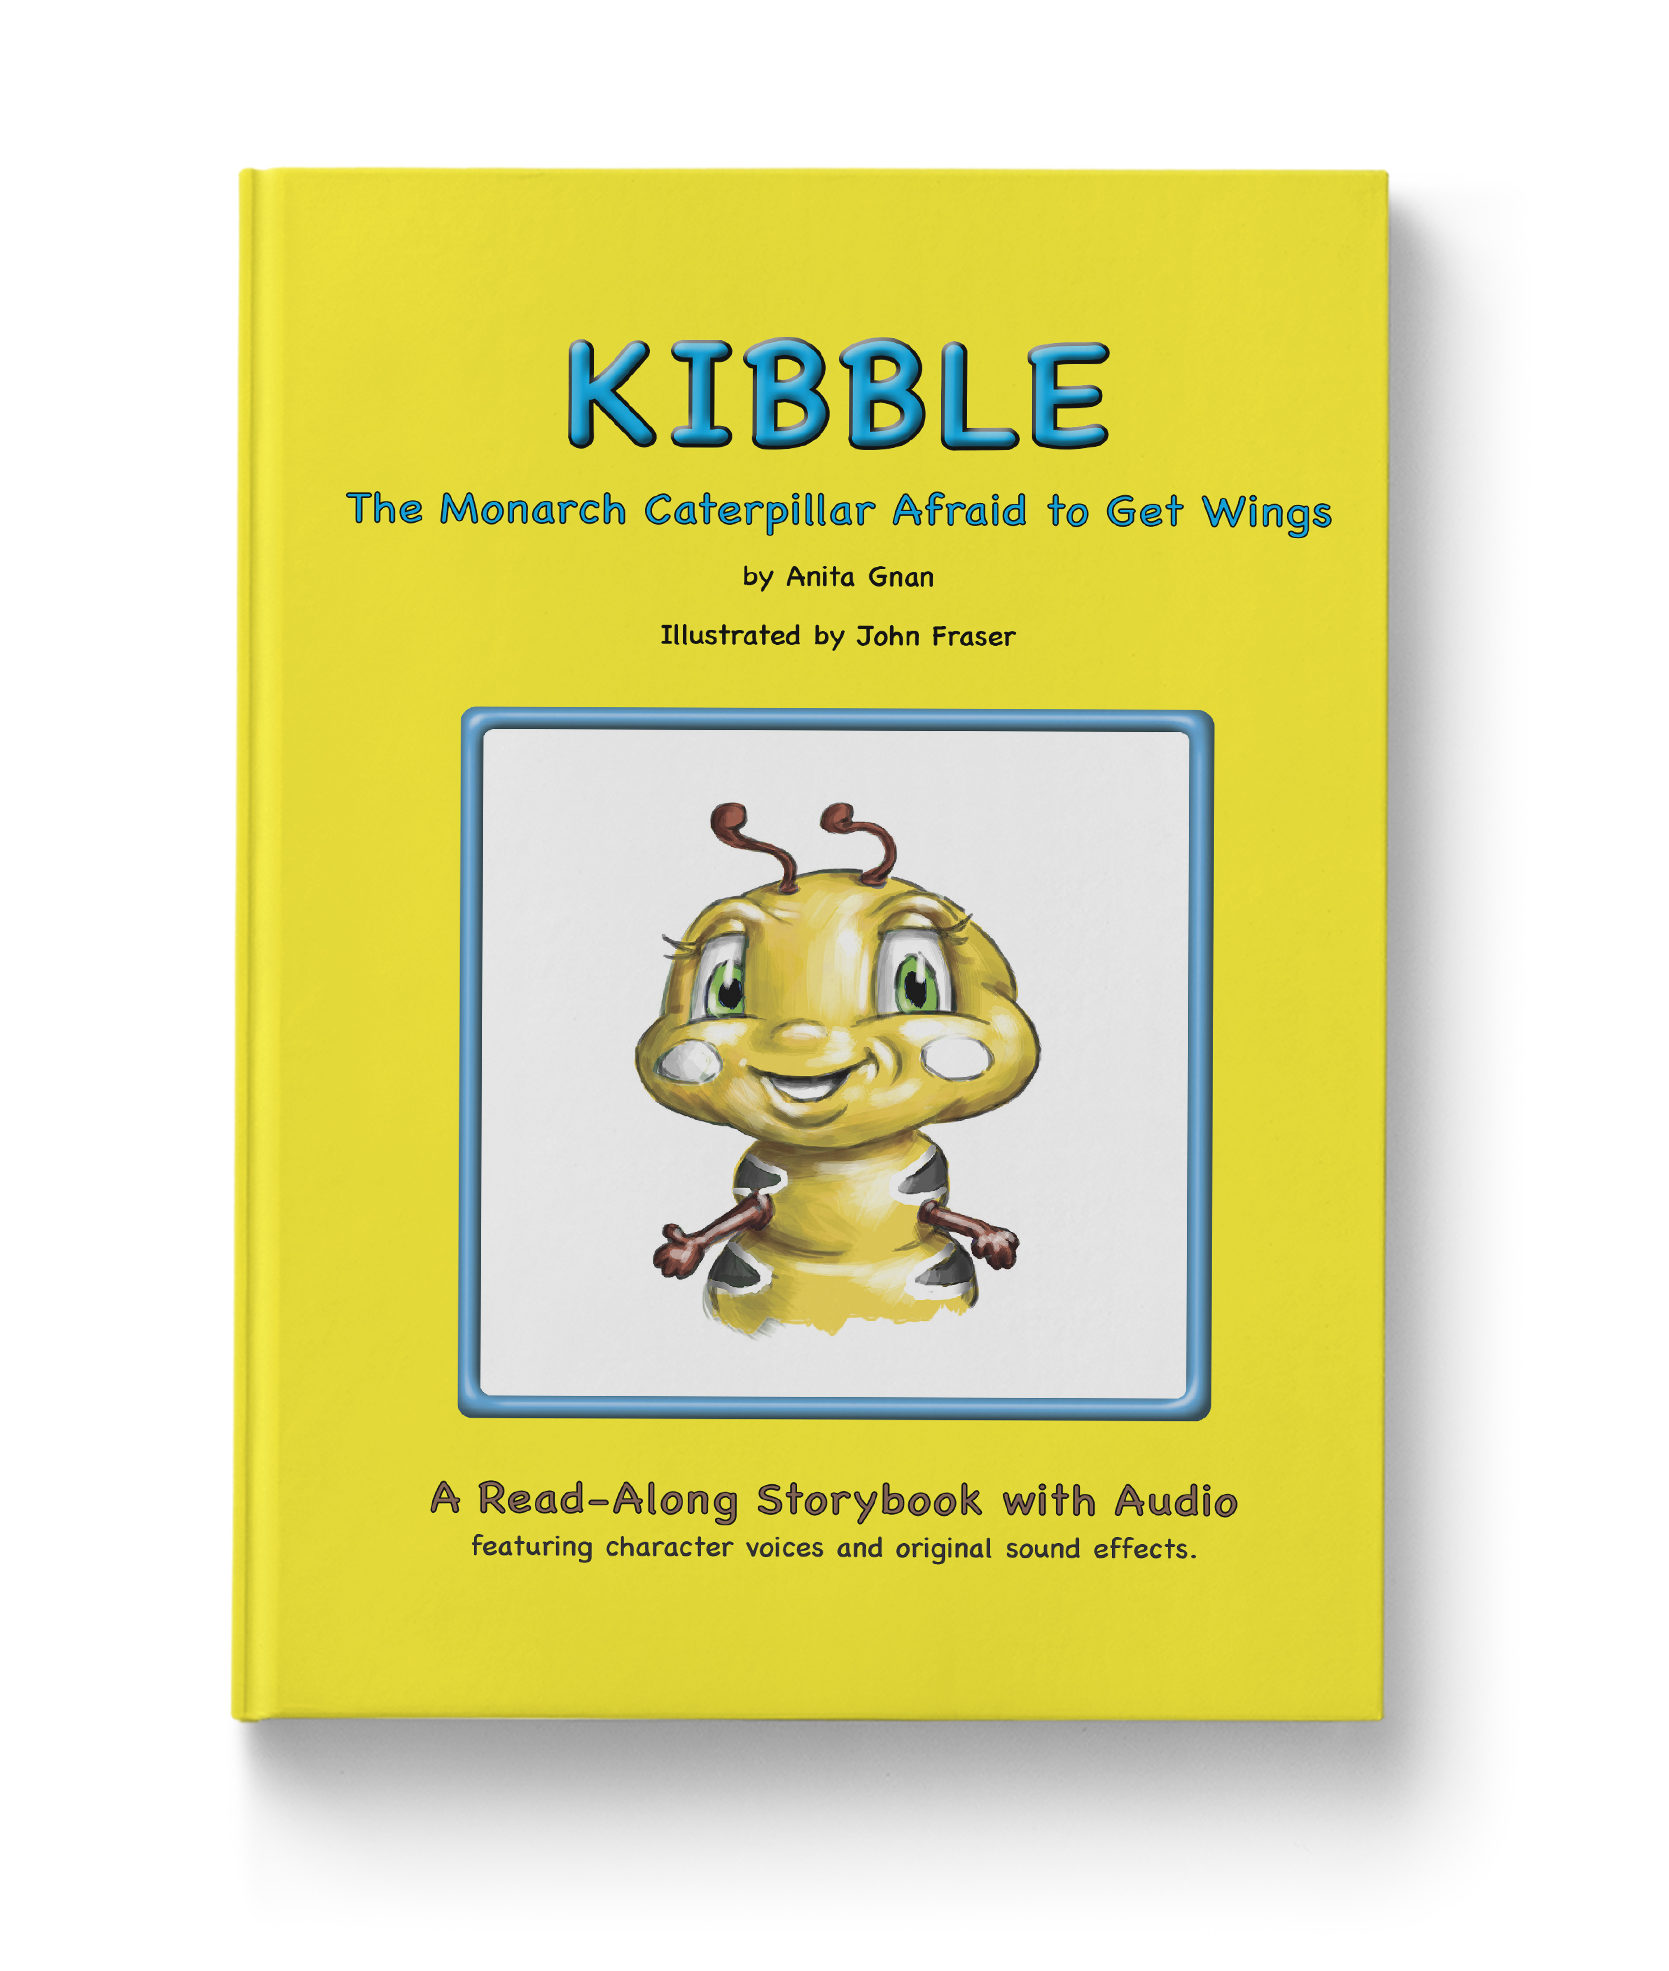 kibble the monarch caterpillar afraid to get wings by anita gnan book cover